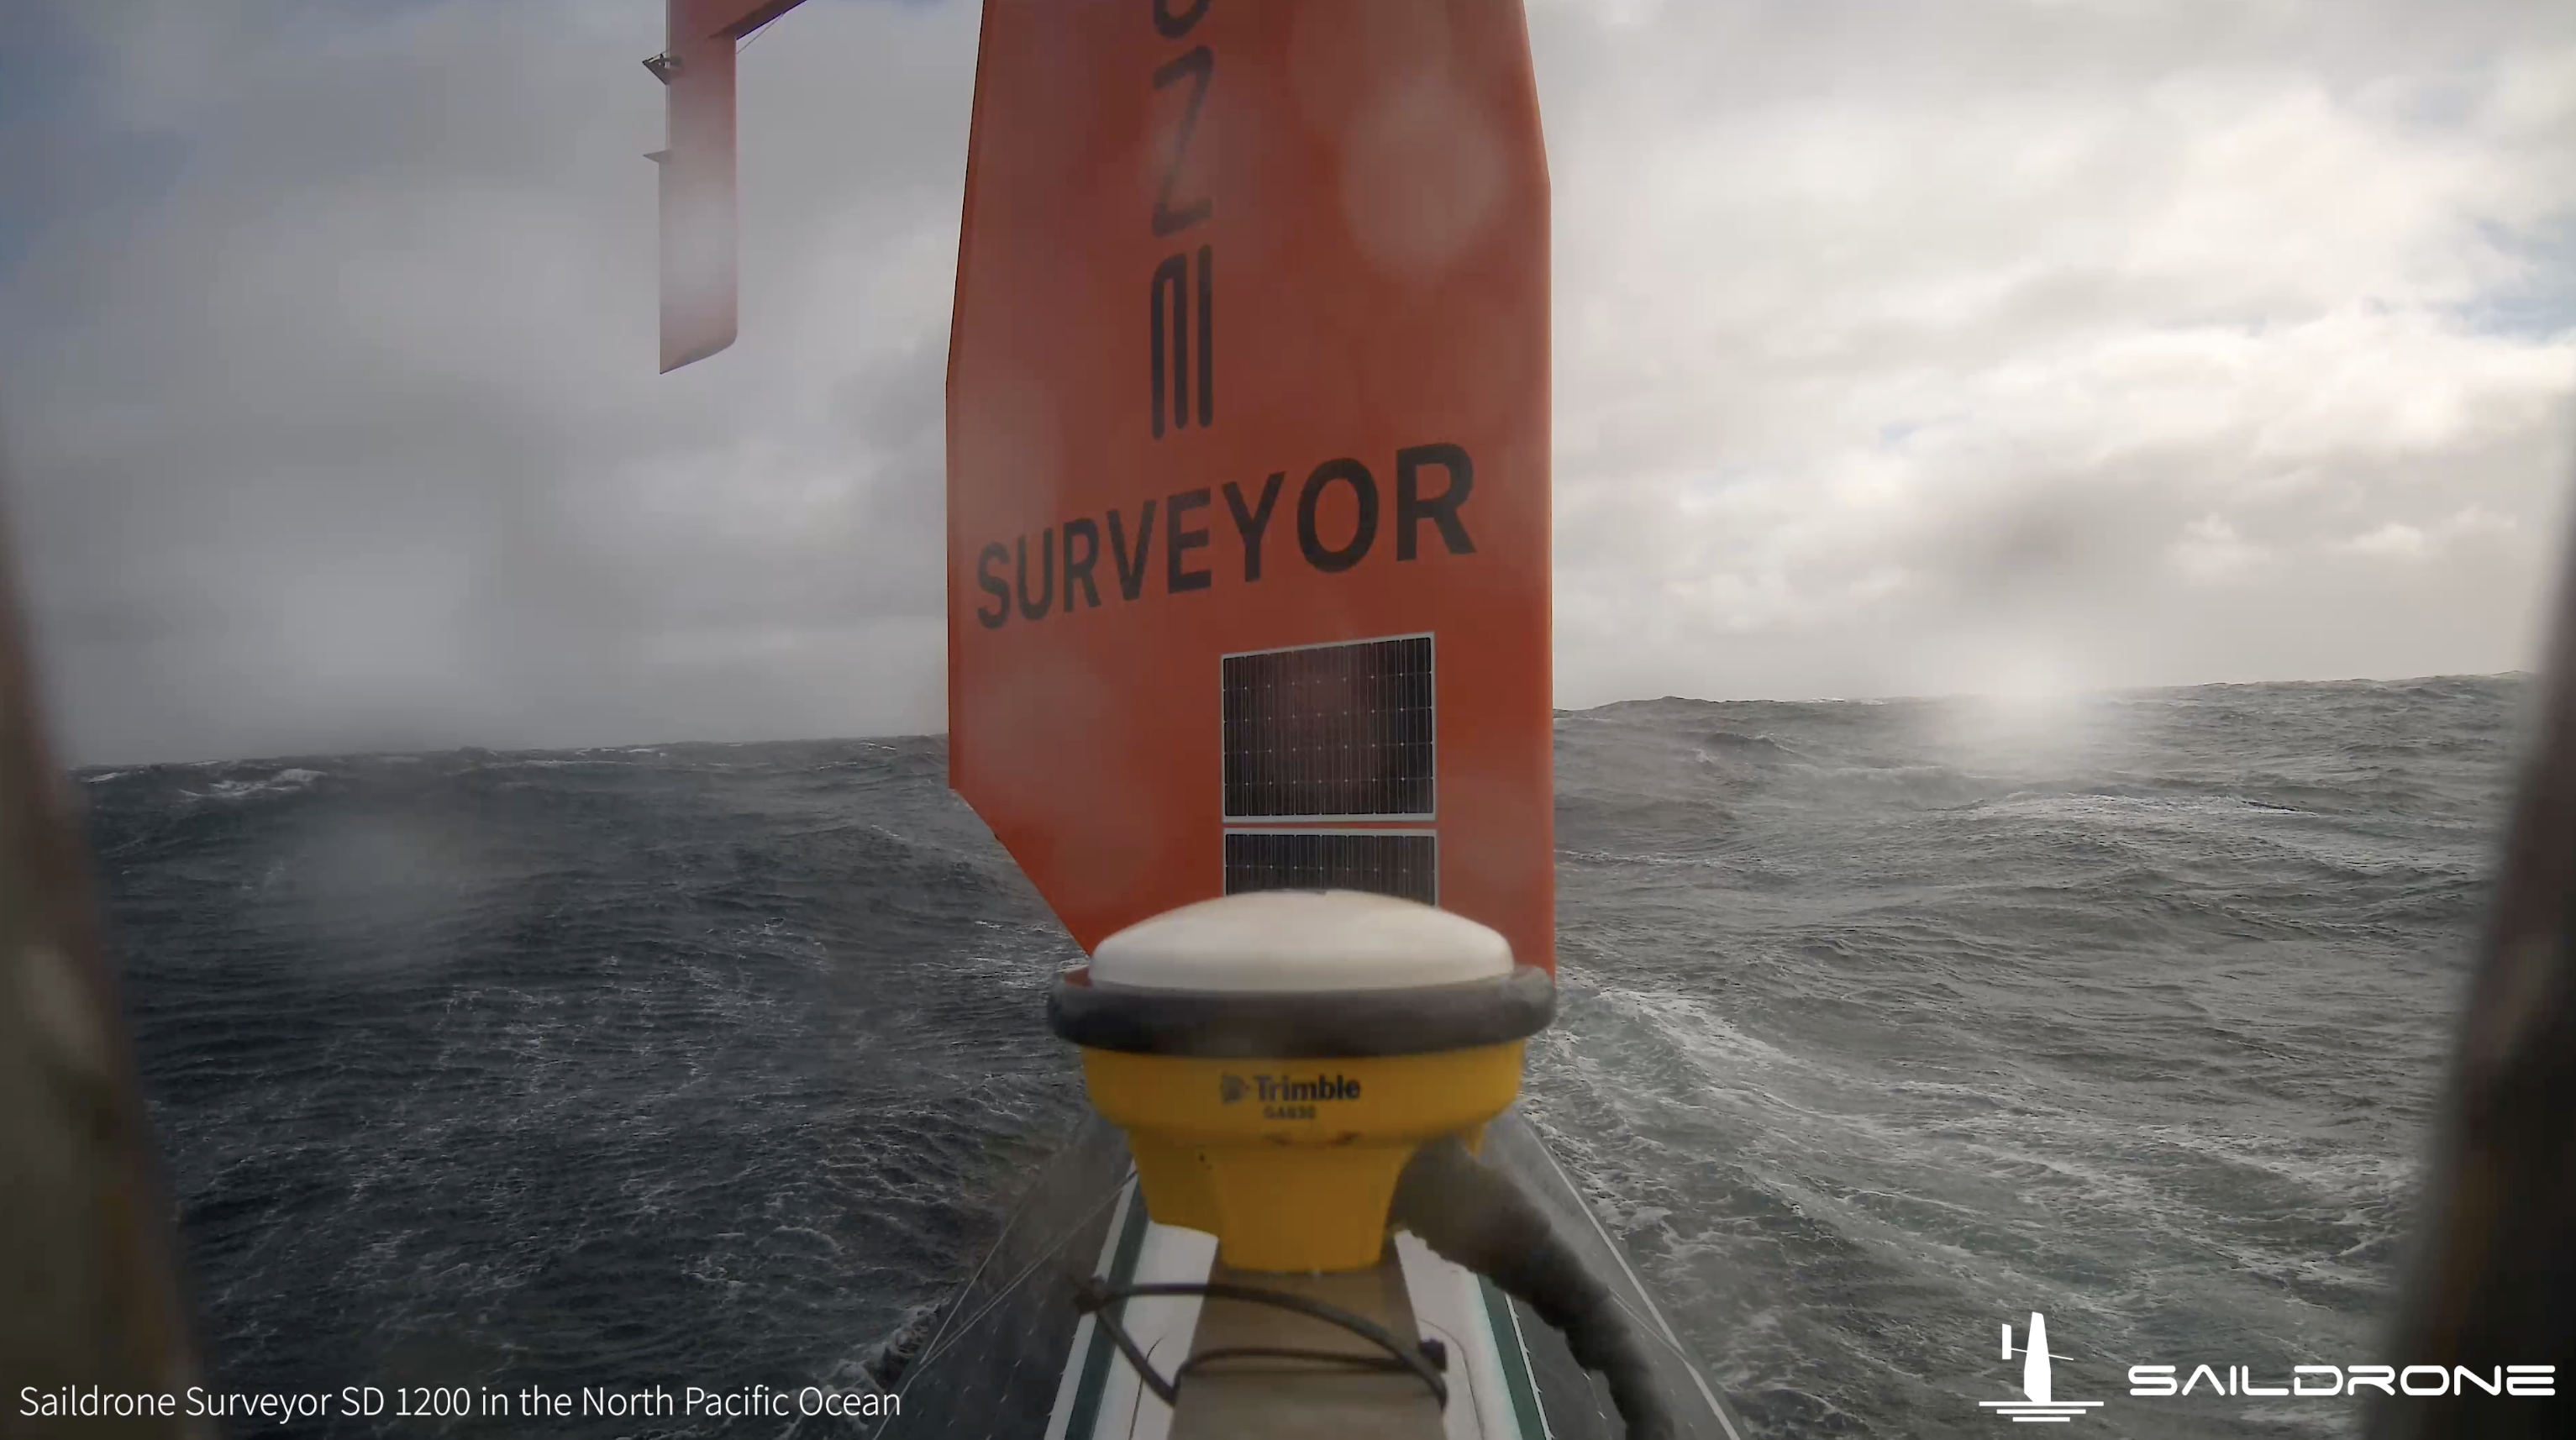 The Saildrone Surveyor in the North Pacific Ocean during its transit from the Aleutian Islands to its home port in Alameda